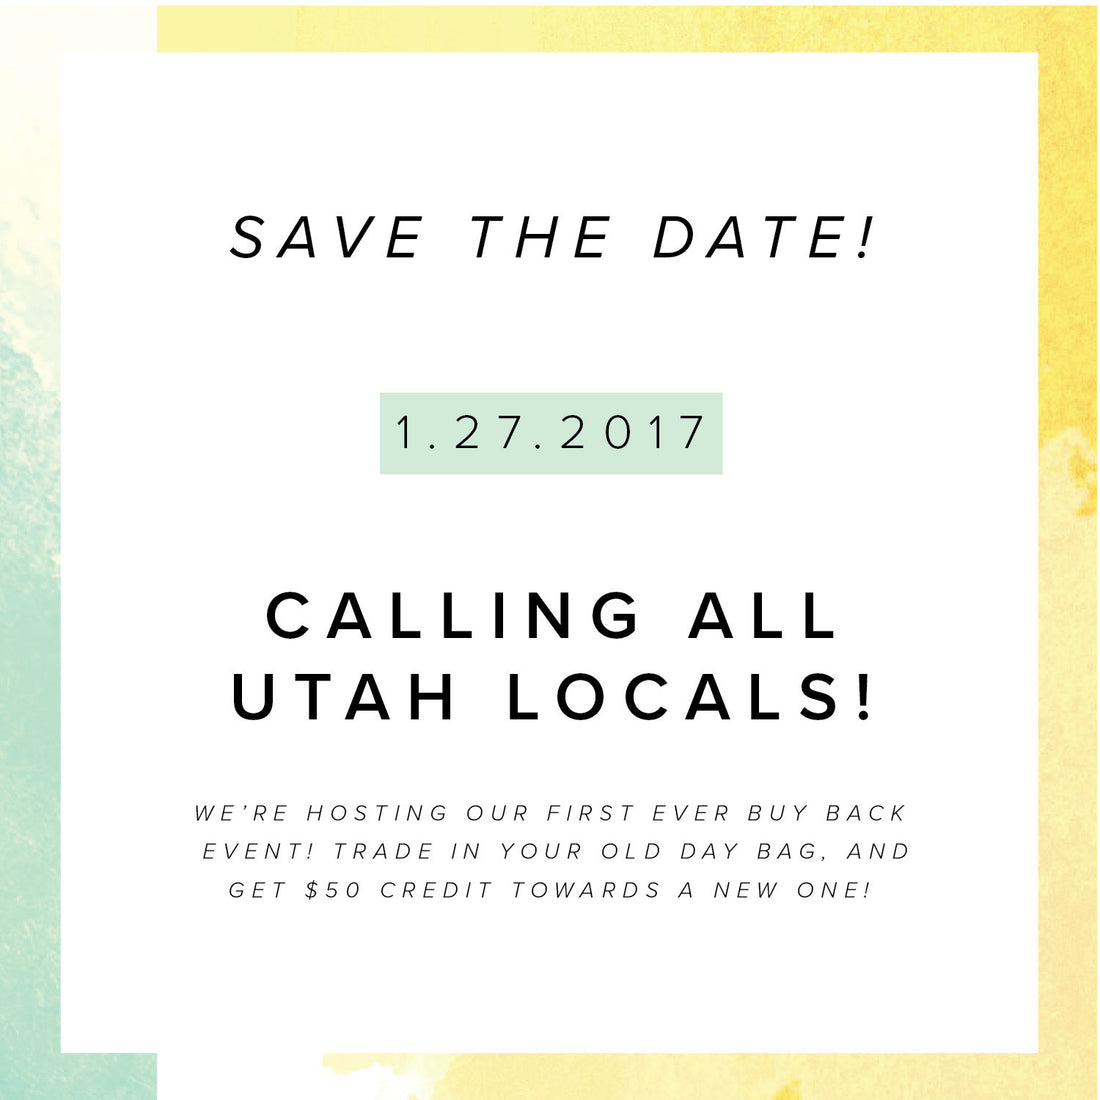 Calling all Utah locals! It's our first ever Buy Back Event!